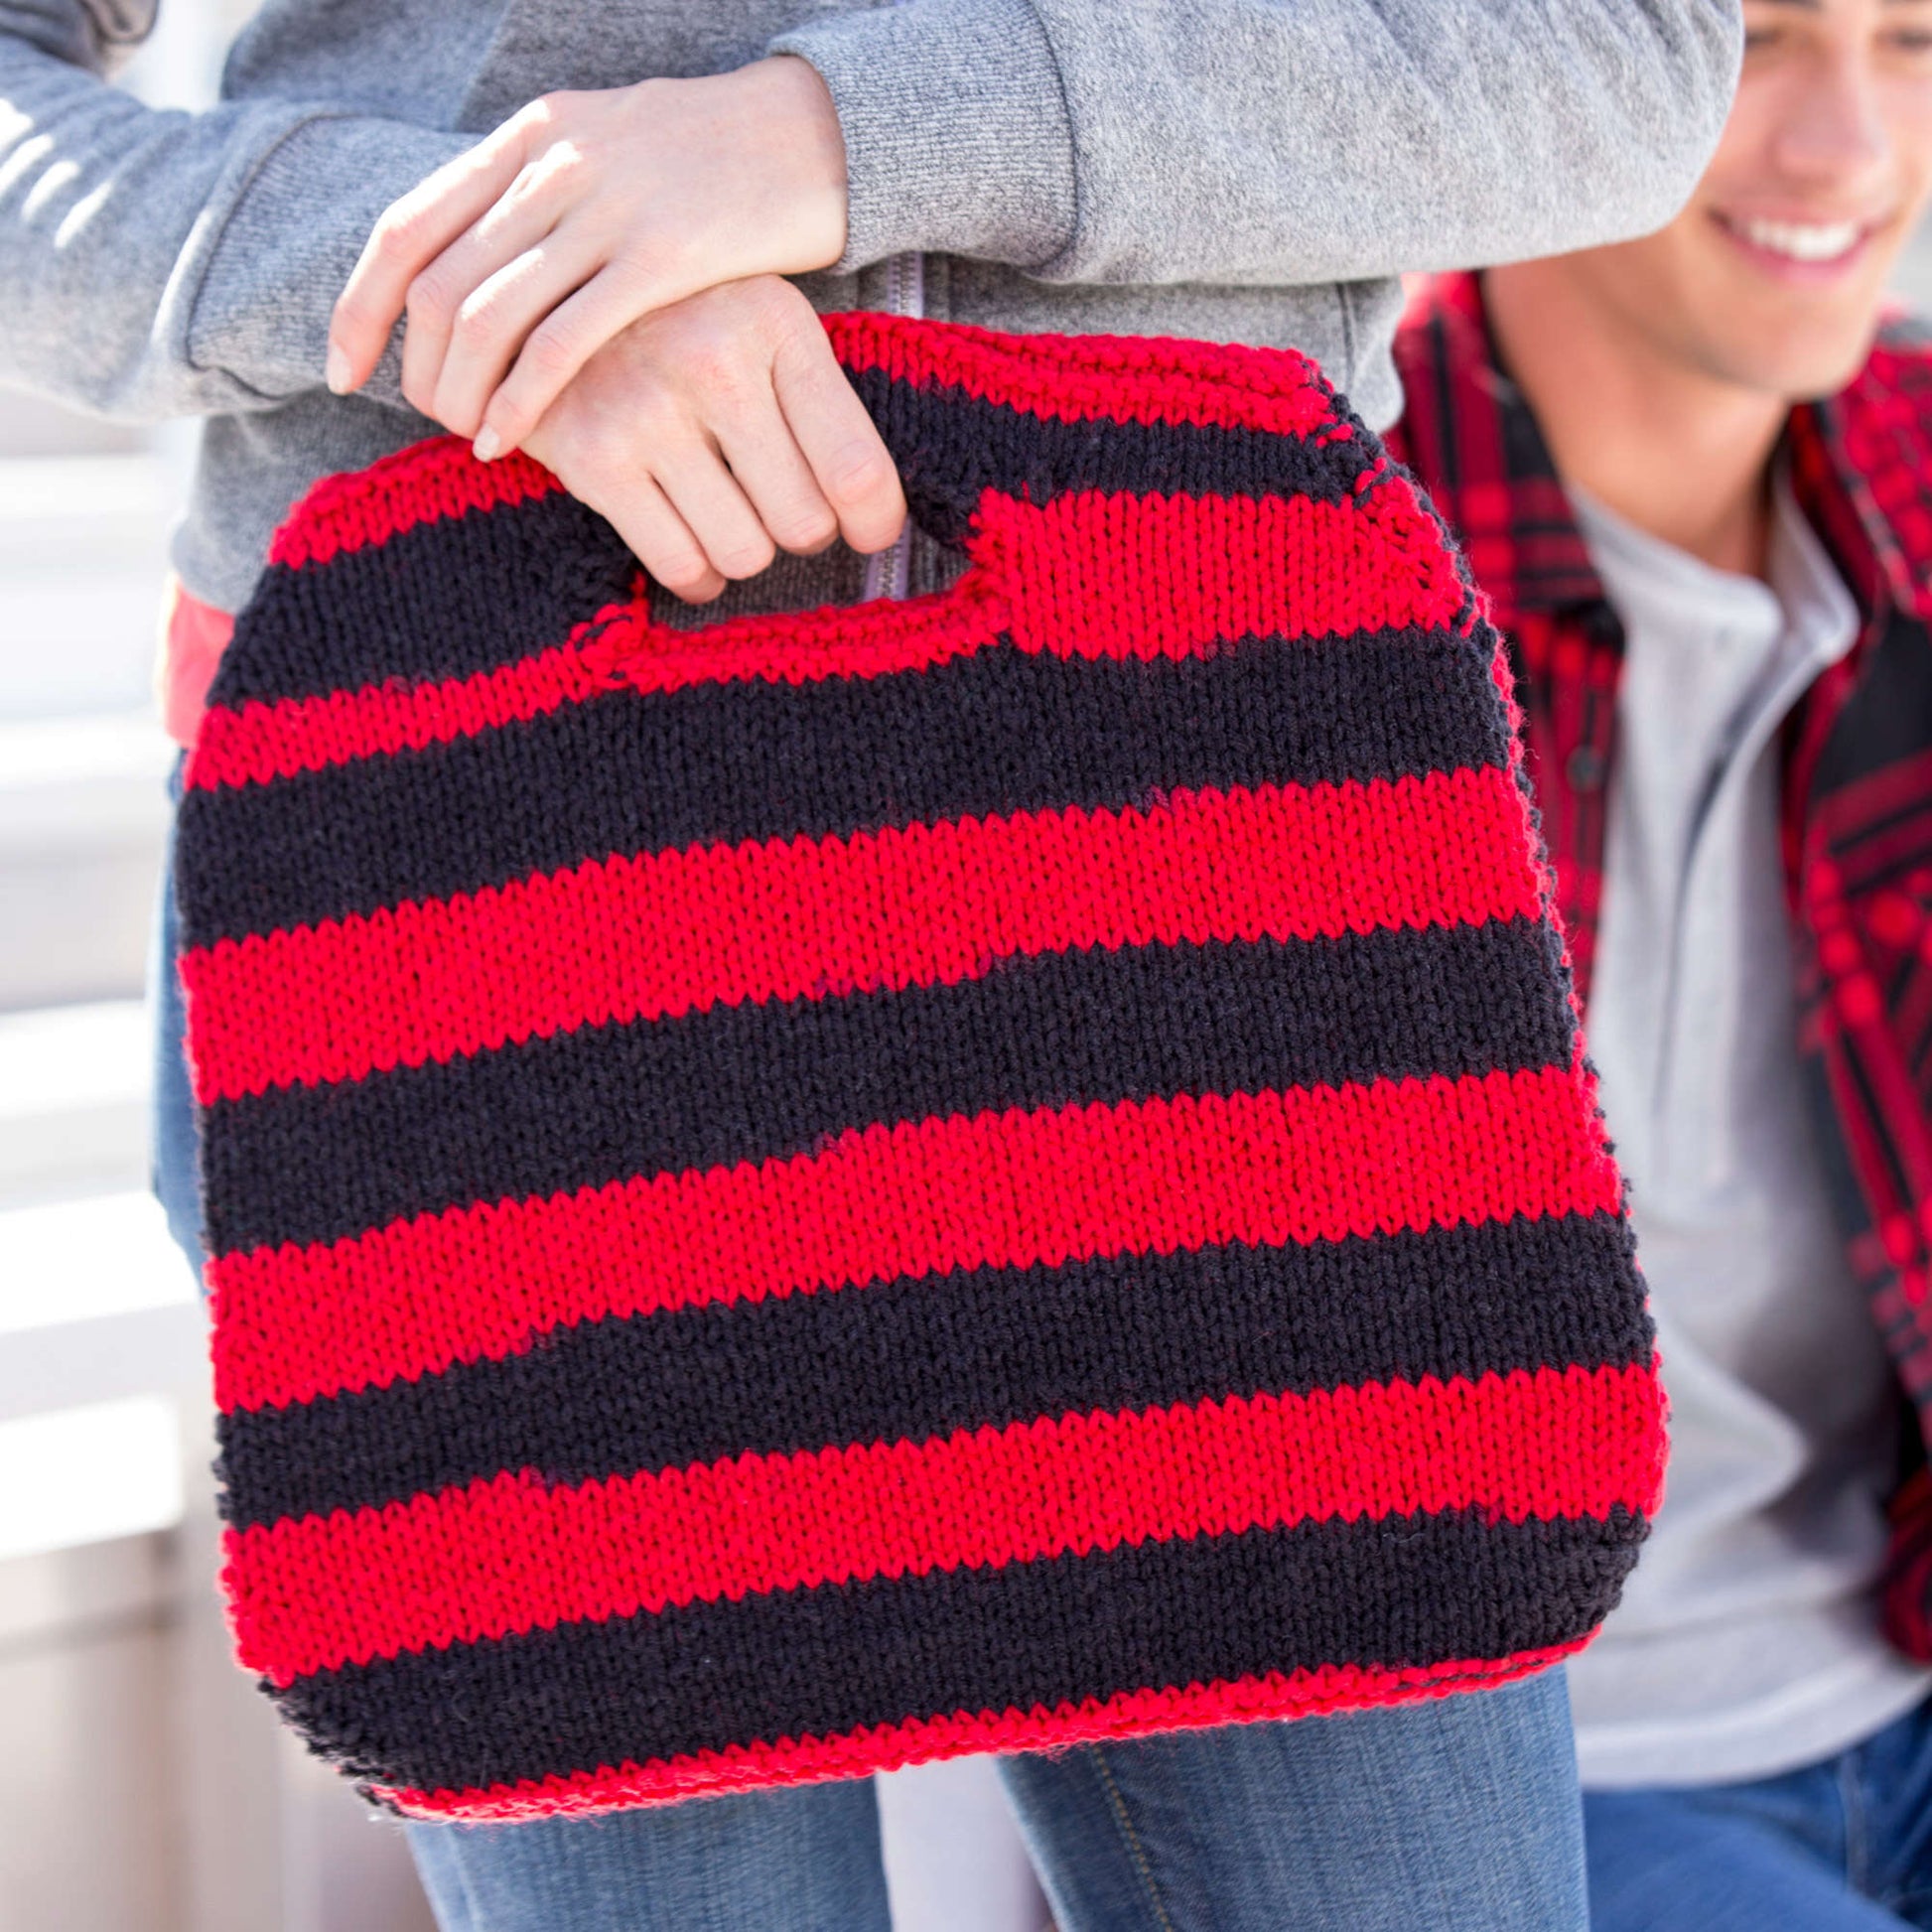 Free Red Heart Knit Stadium Seat Cover Pattern